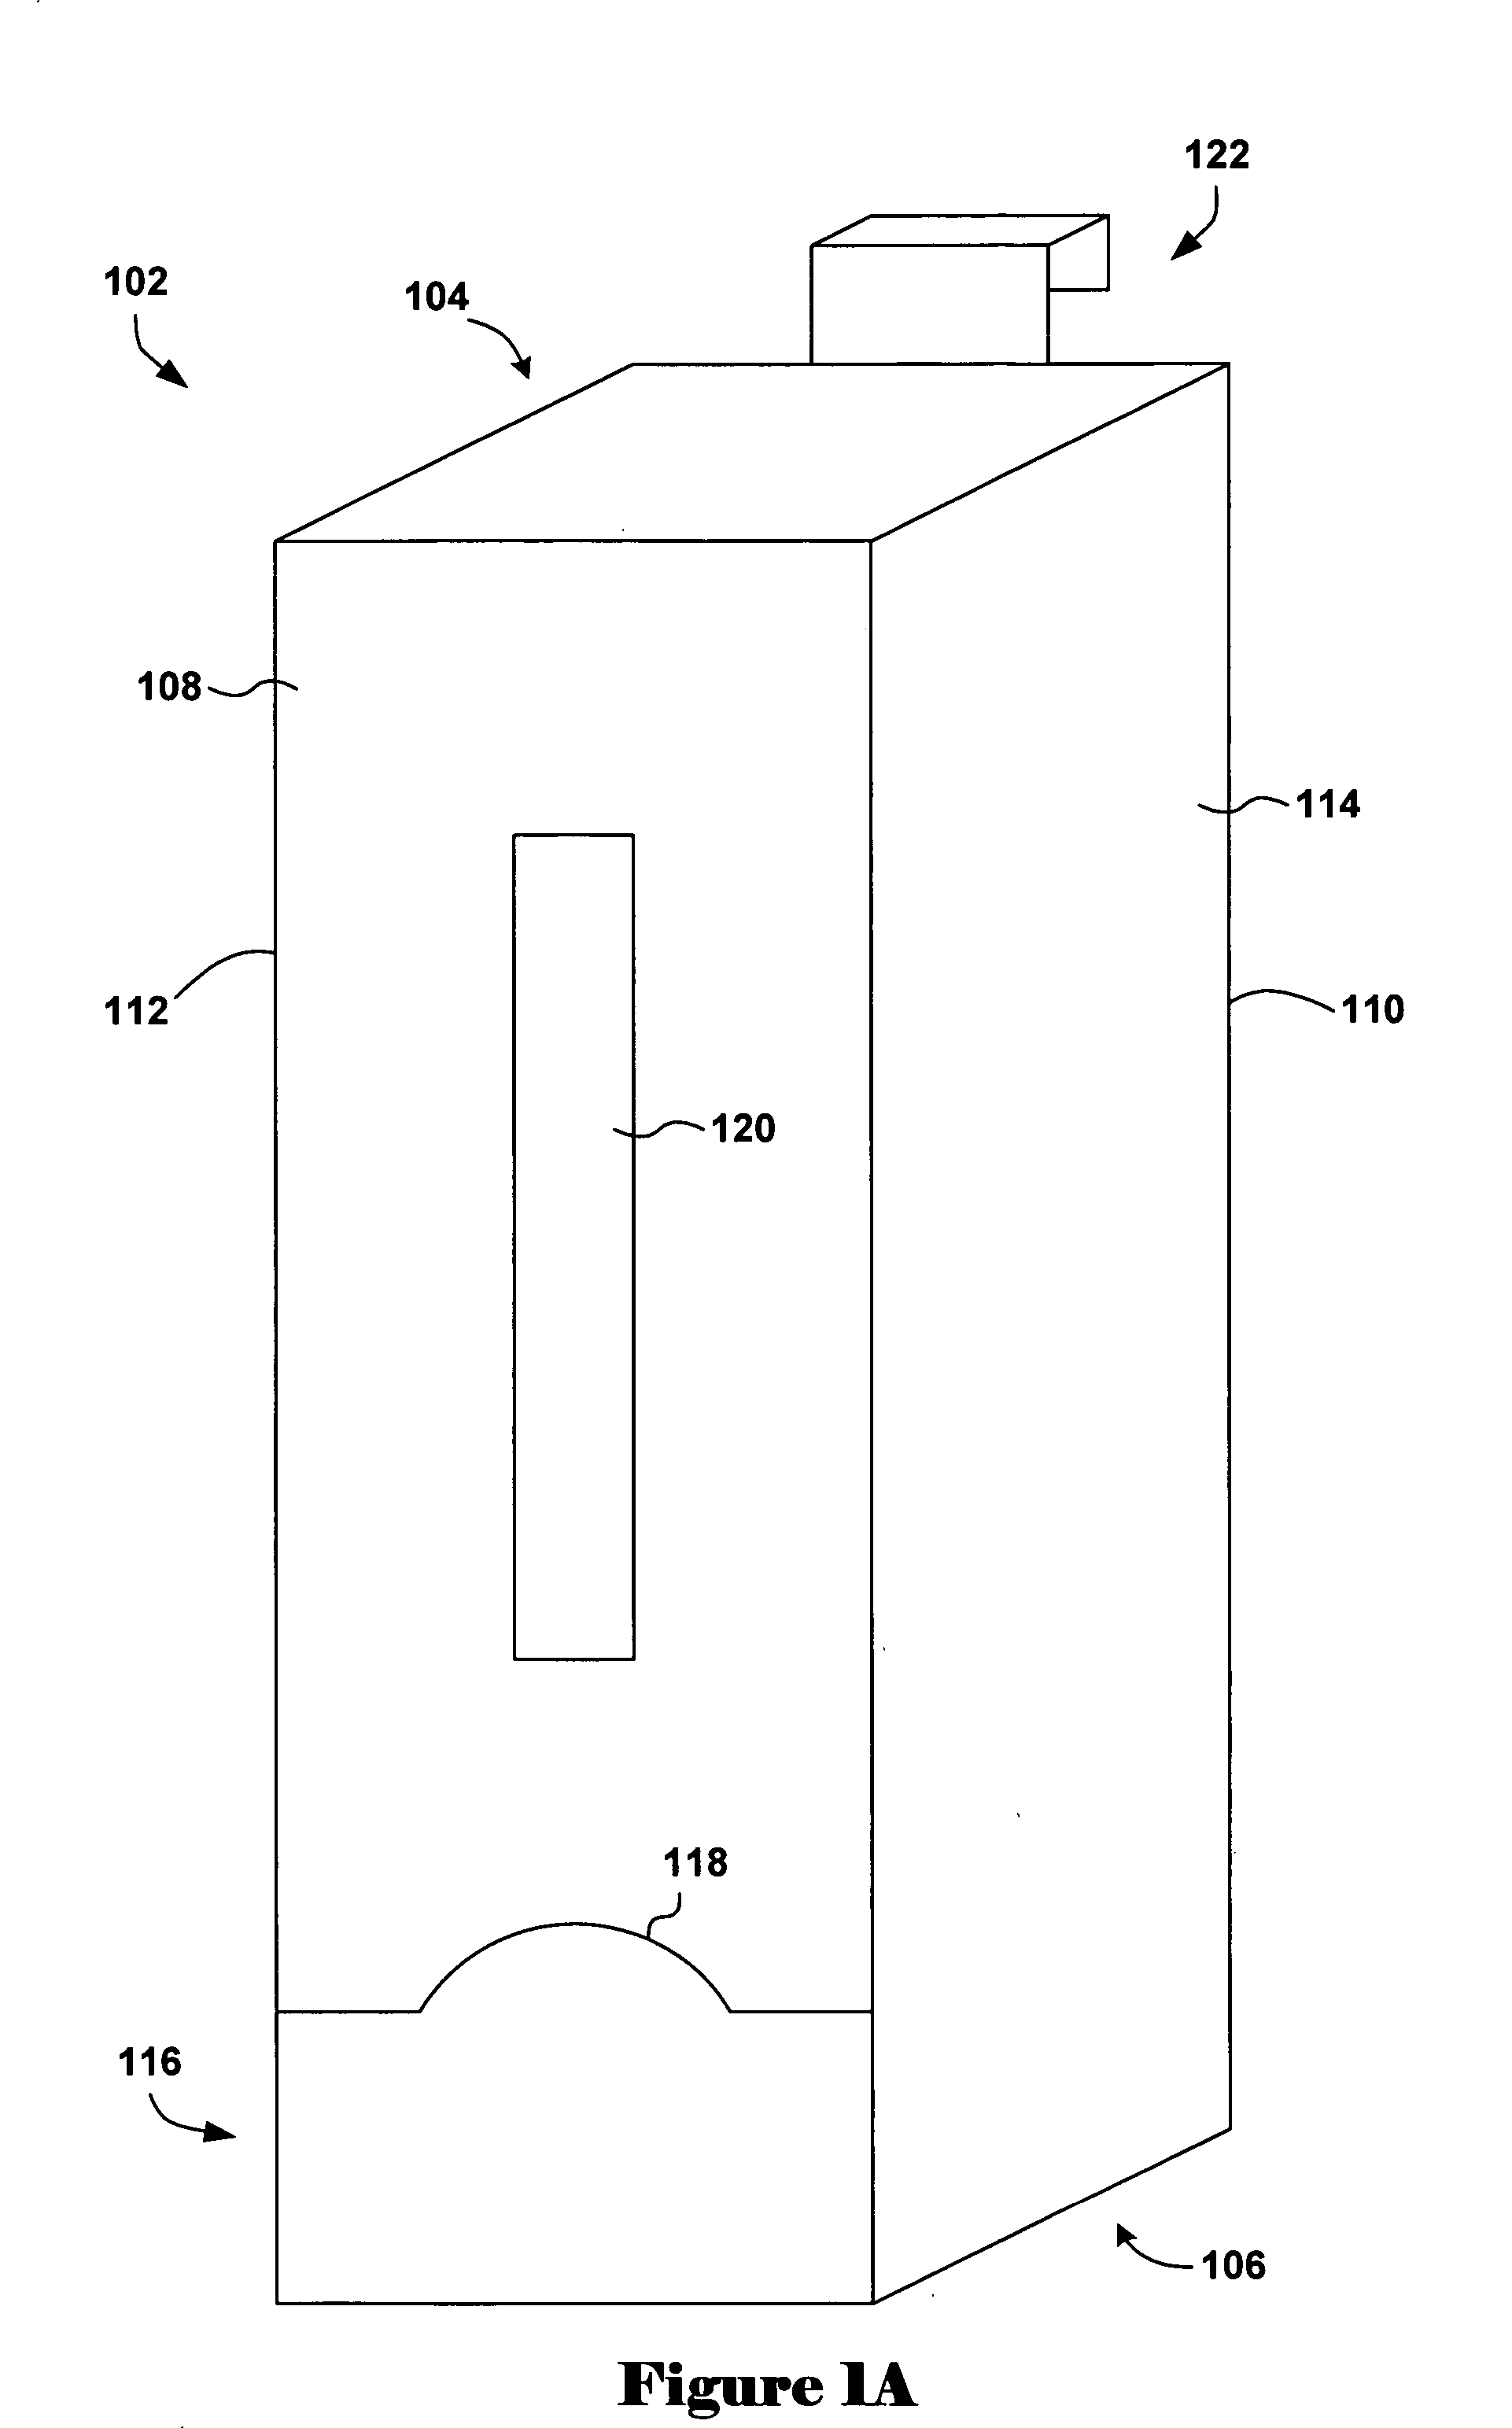 Method and system for storing and dispensing rolled paper products